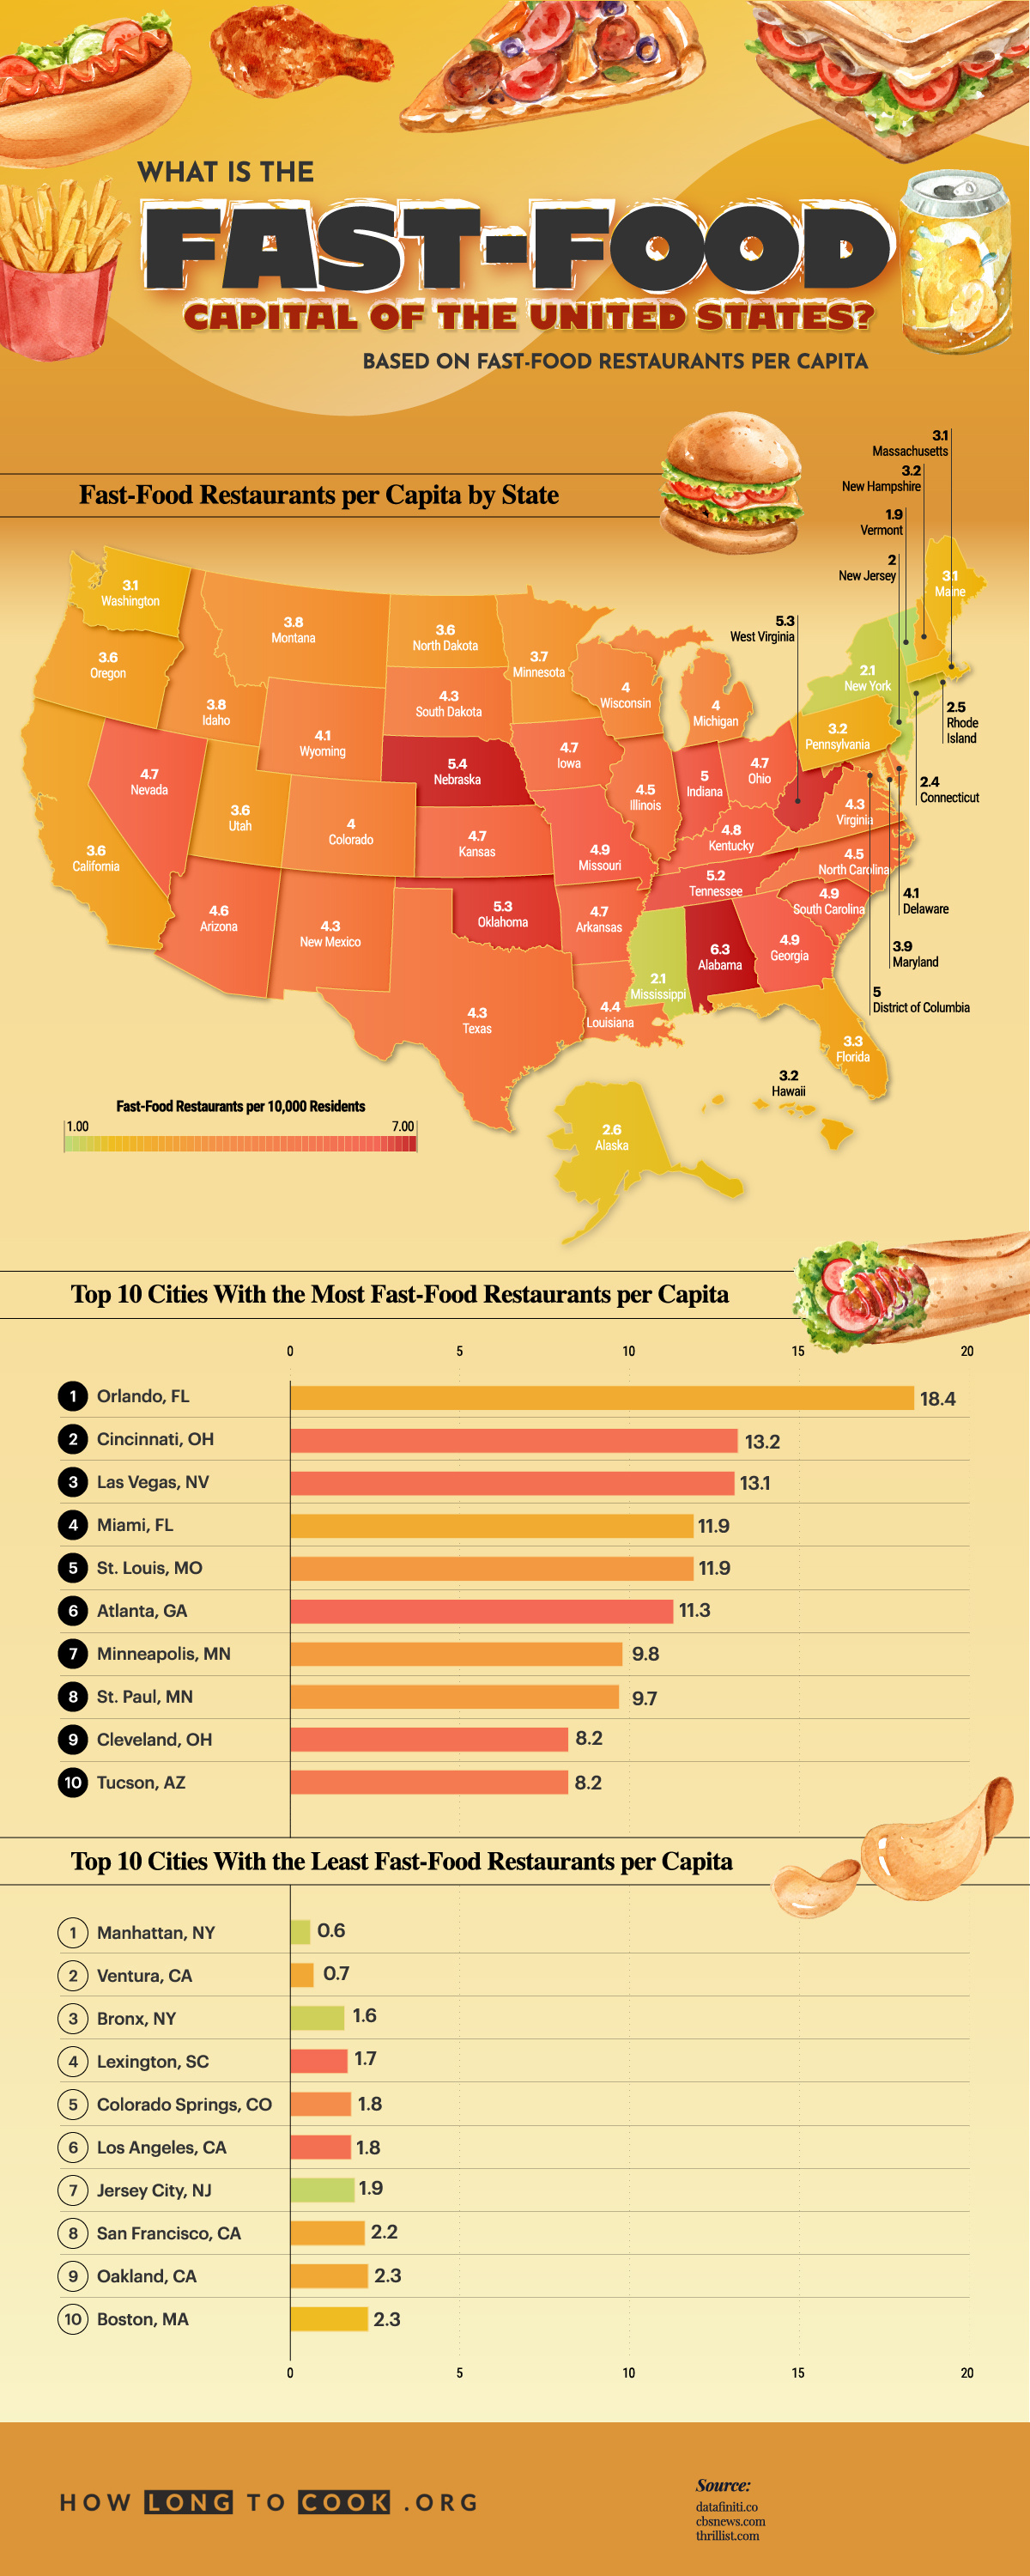 What Is the Fast-Food Capital of the United States?